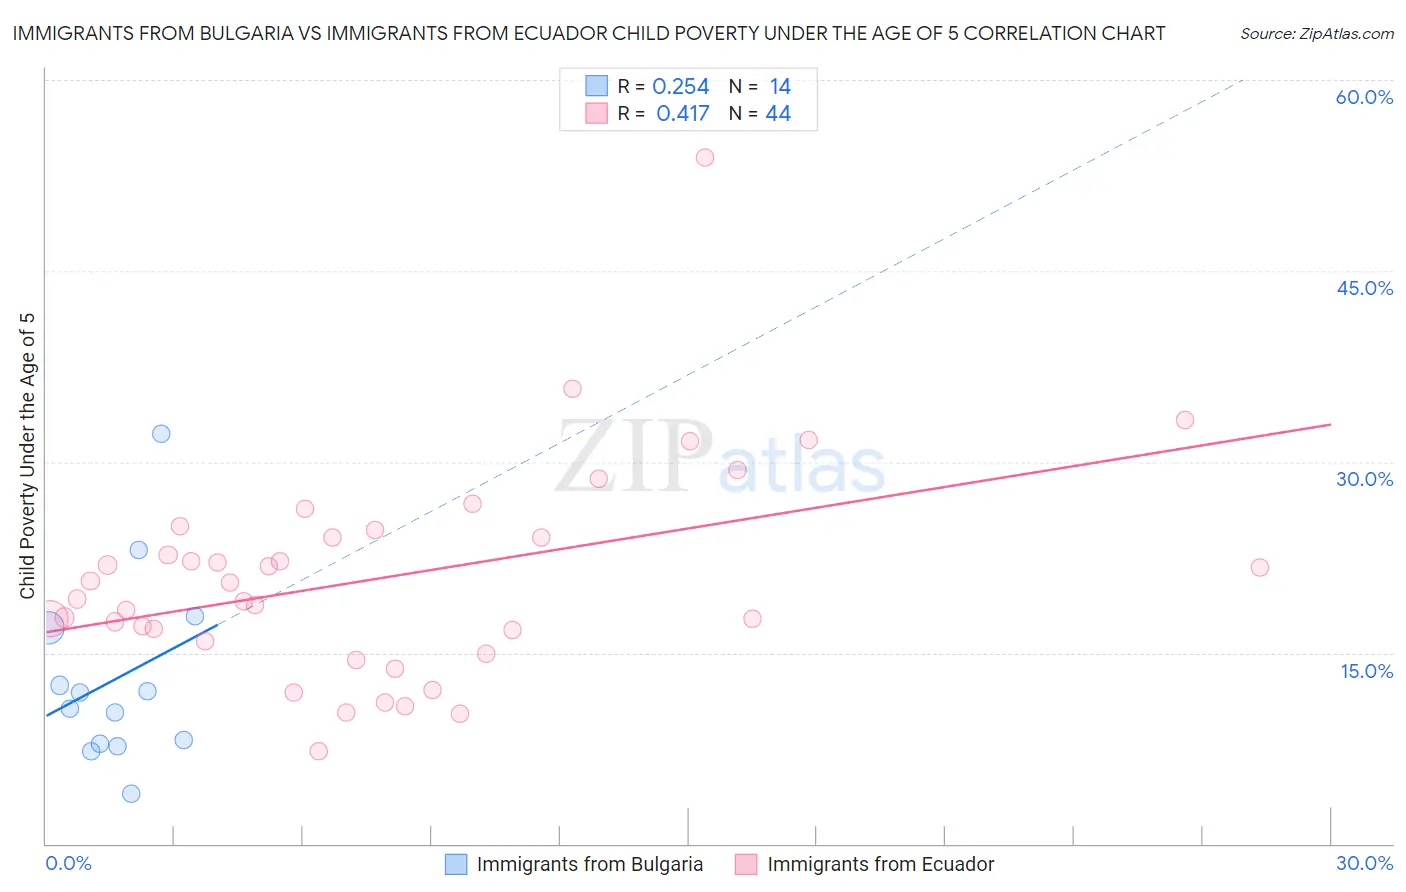 Immigrants from Bulgaria vs Immigrants from Ecuador Child Poverty Under the Age of 5